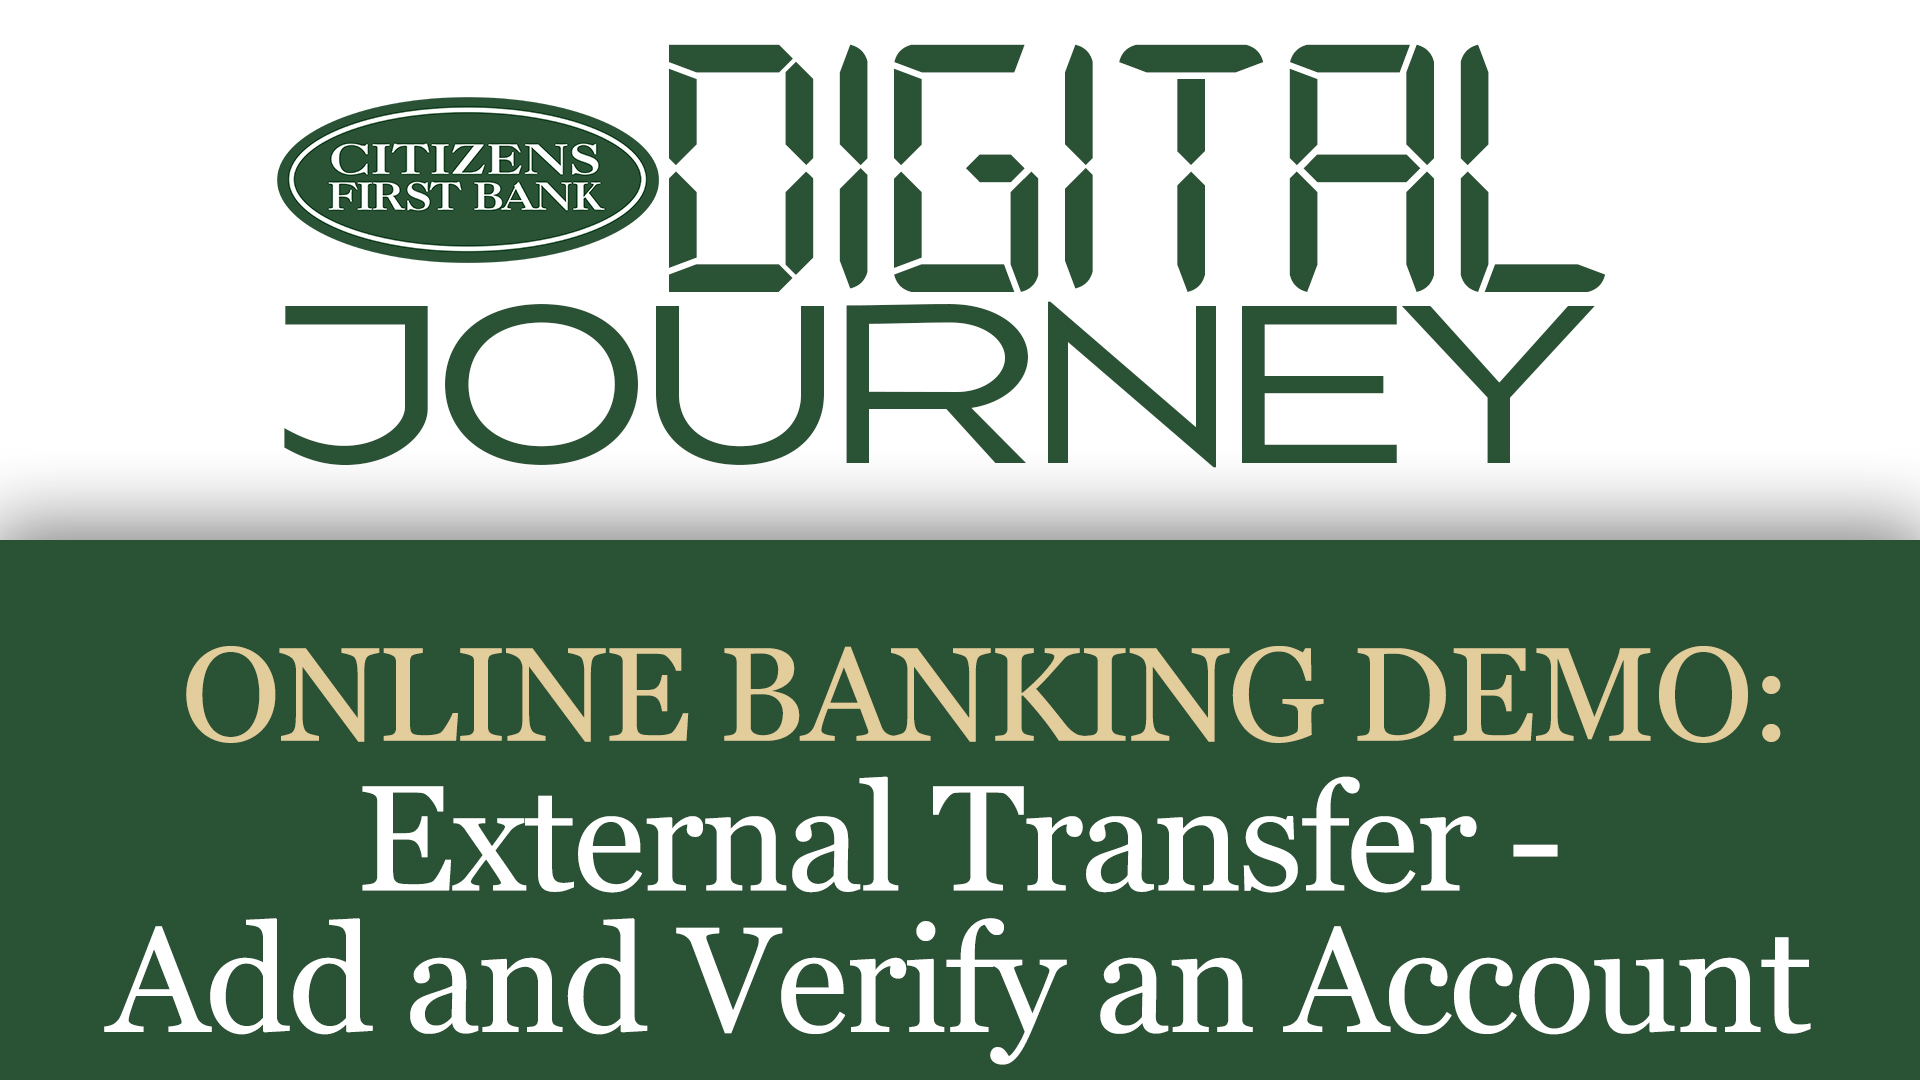 Digital Journey logo with our online banking demo: External Transfer - Add and Verify an Account